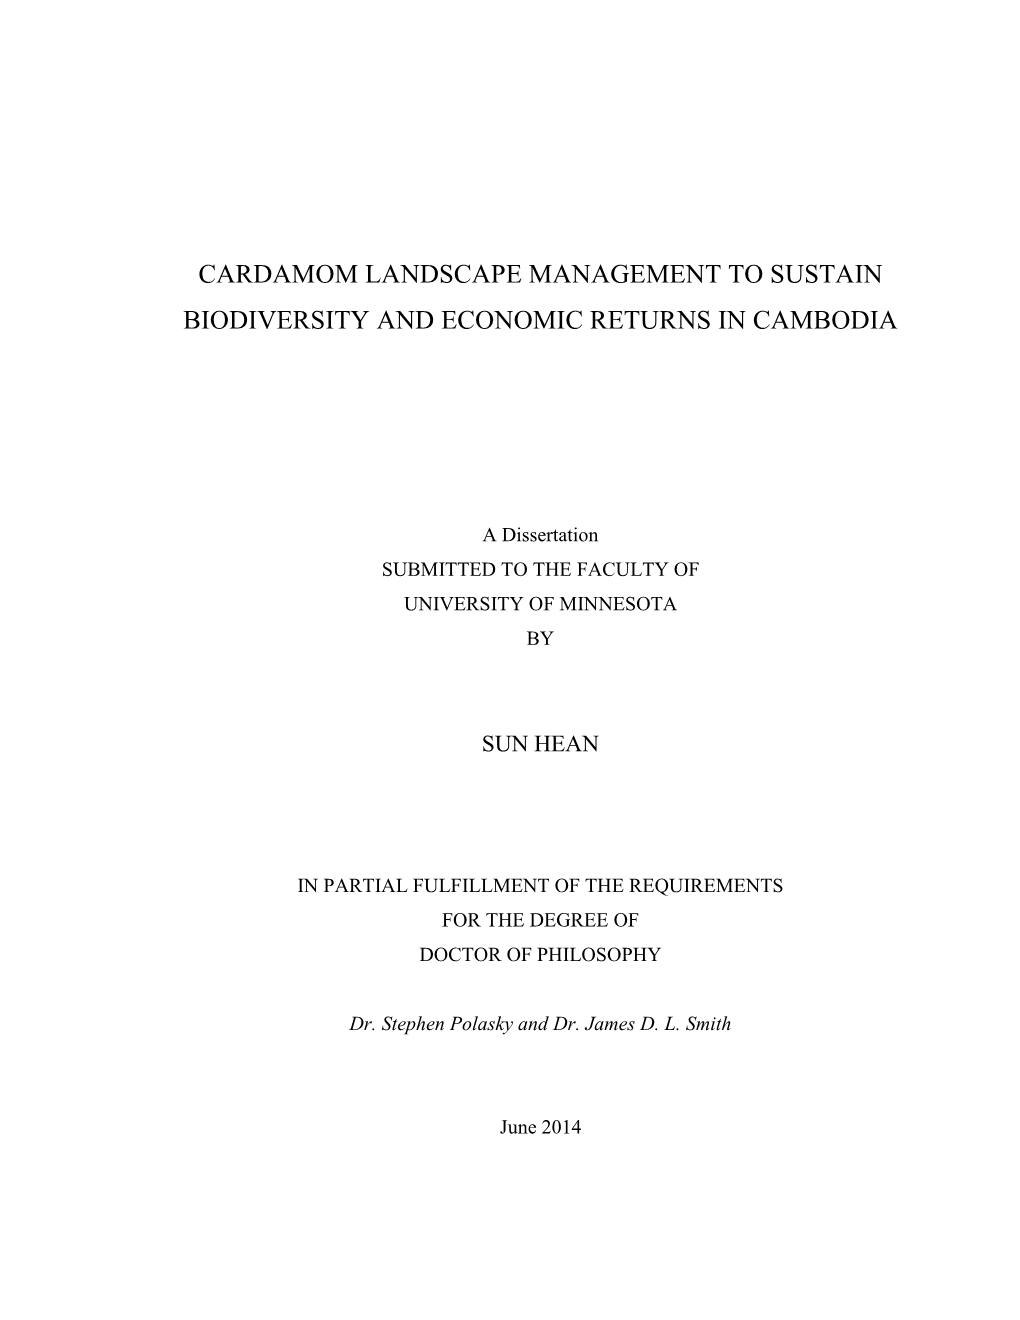 Conservation and Development in the Cardamom Landscape: History and Current Context